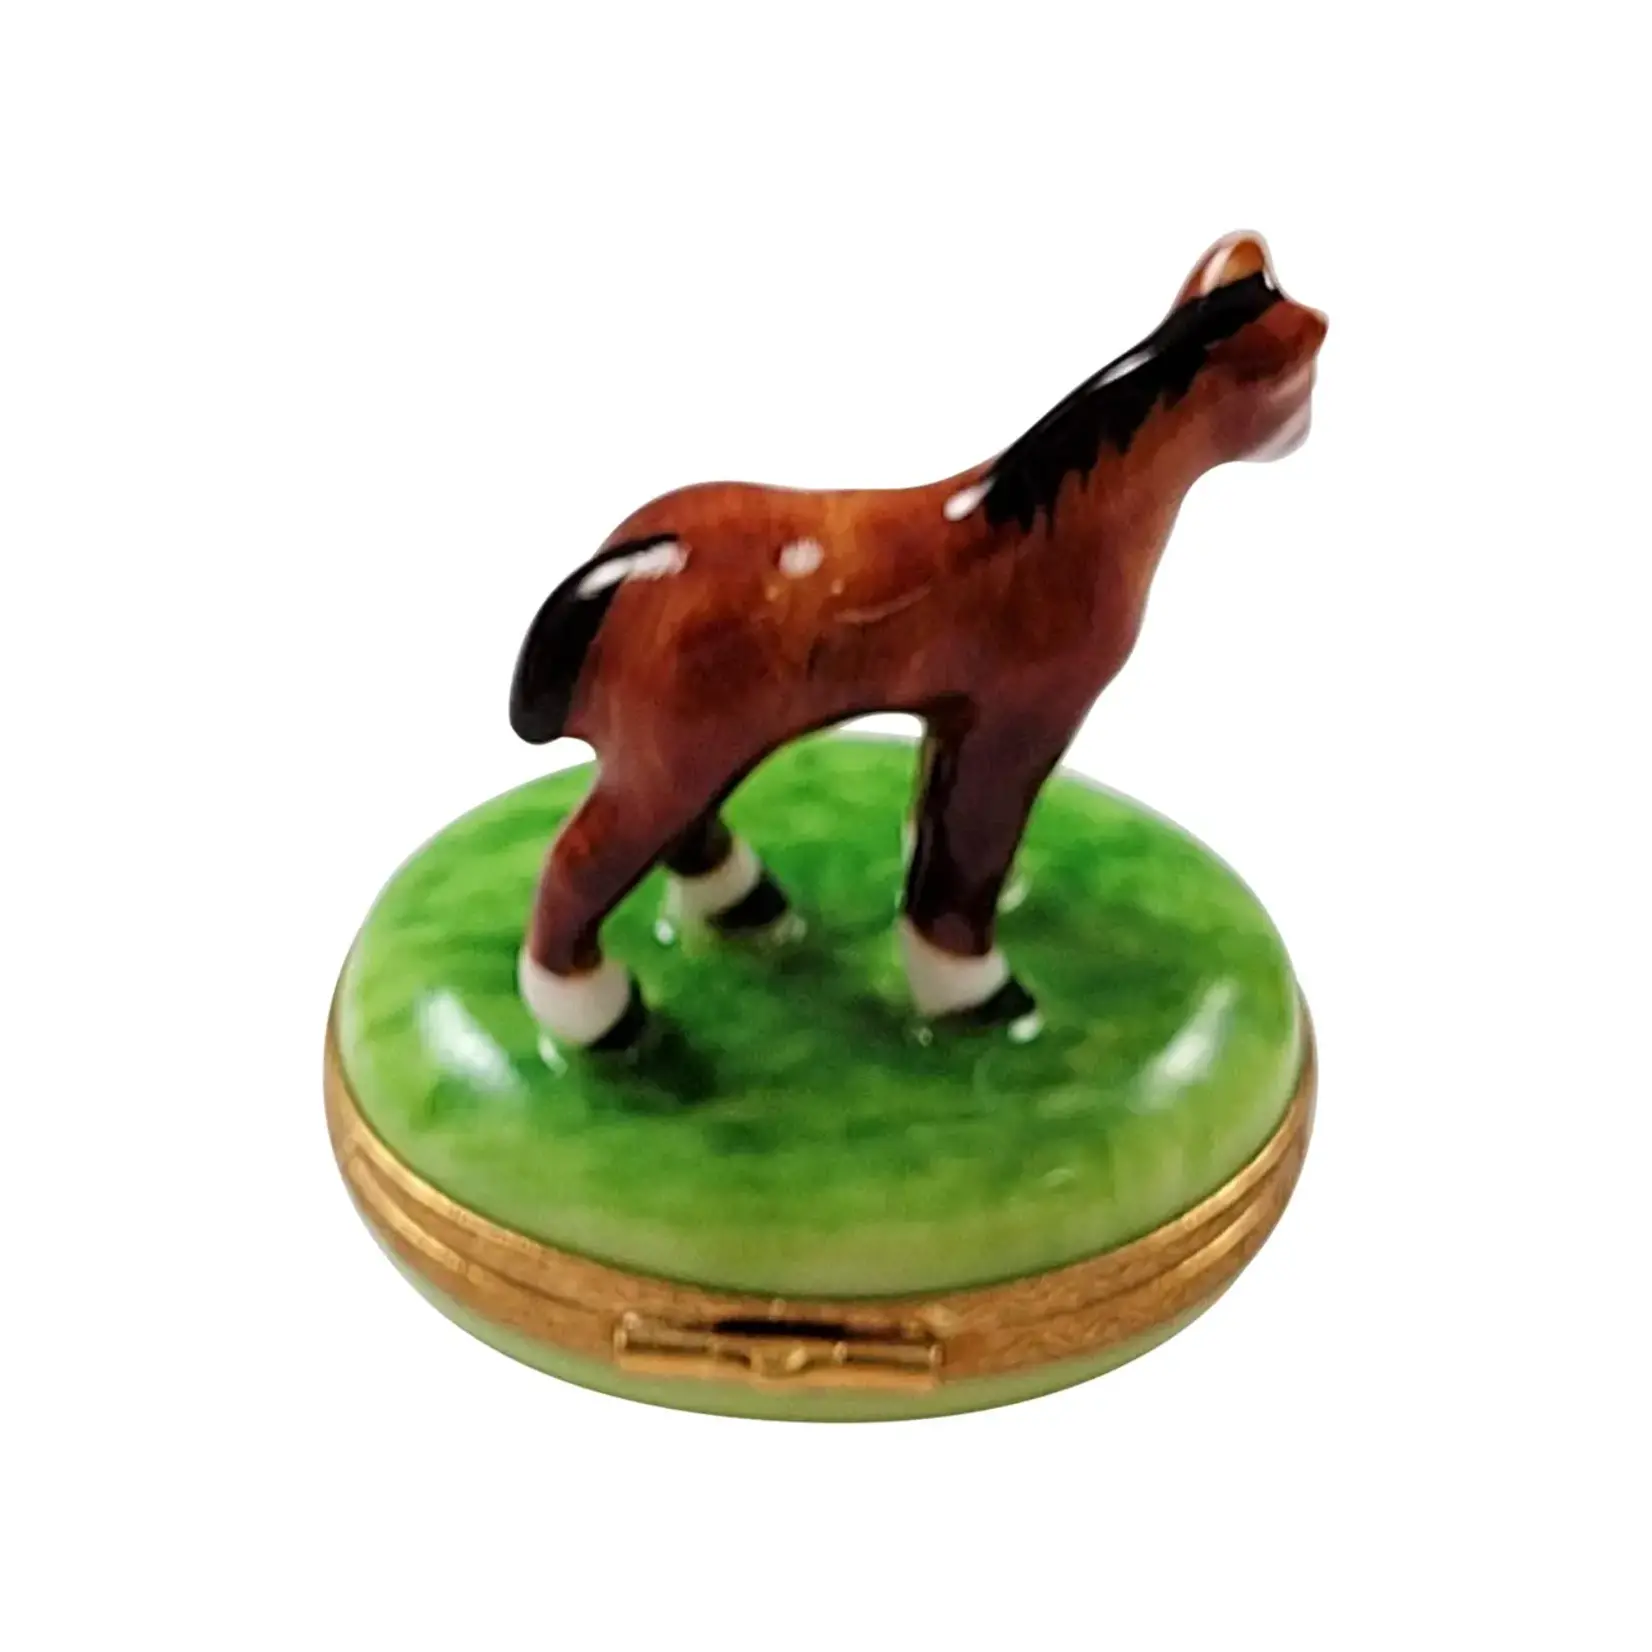 Rochard Limoges Standing Mini Horse With A Removable Brass Horseshoe